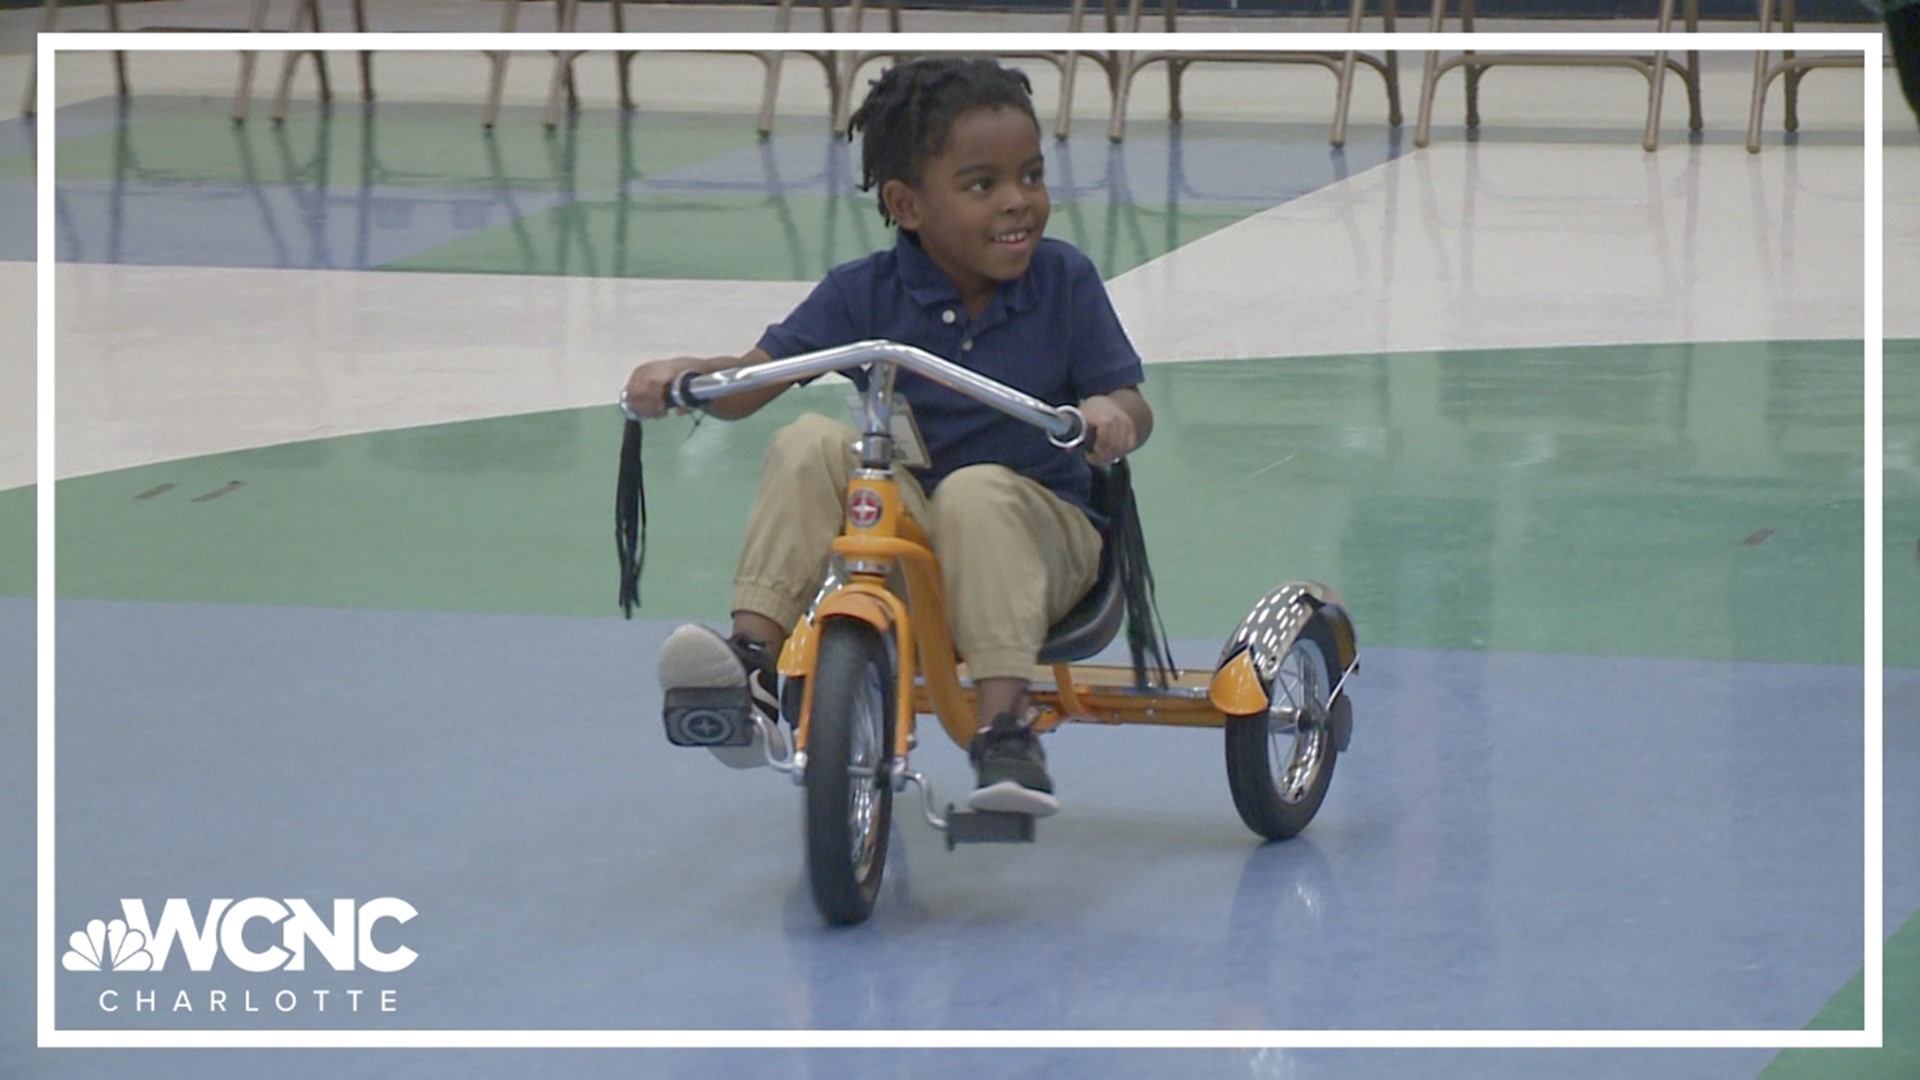 More than 150 bikes were donated to students at Joseph W. Grier Academy in Charlotte.